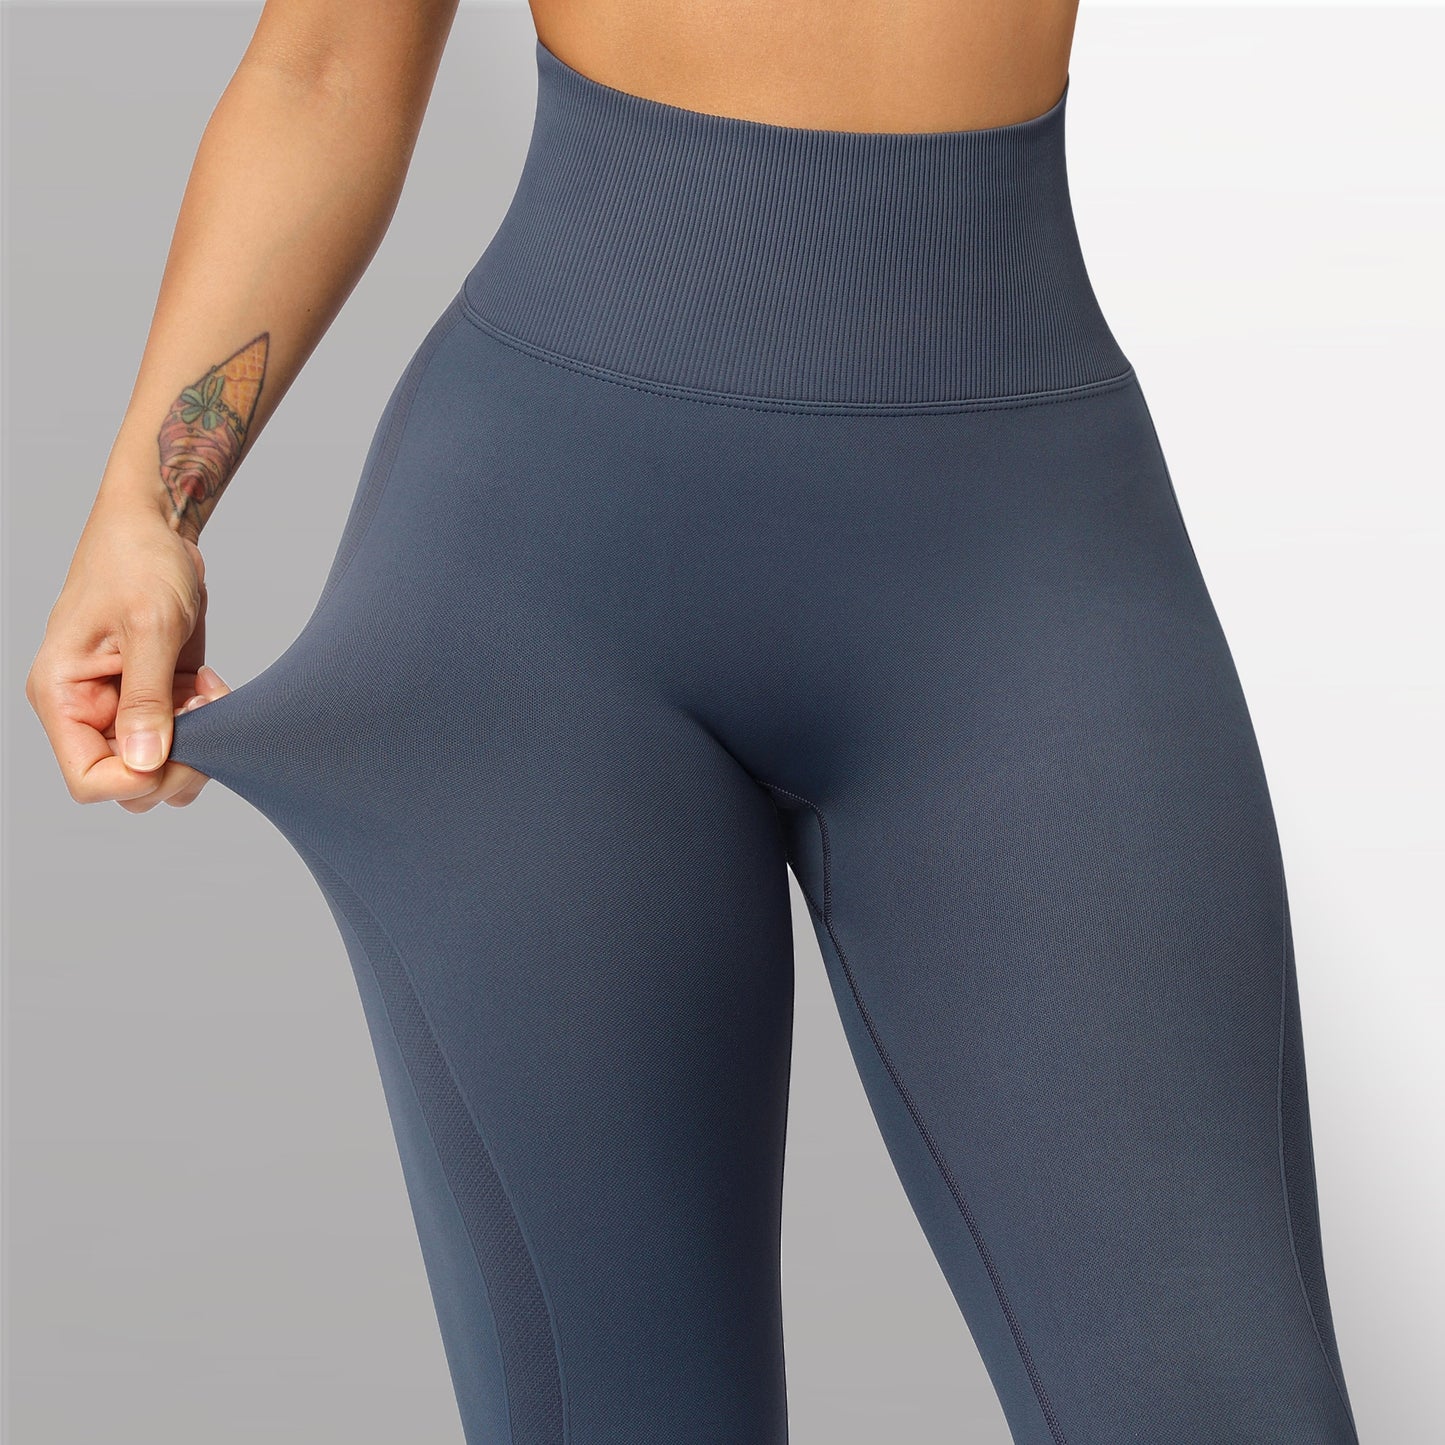 RUUHEE Seamless Leggings Solid Scrunch Butt Lifting Booty High Waisted Sportwear Gym Tights Push Up Women Leggings For Fitness